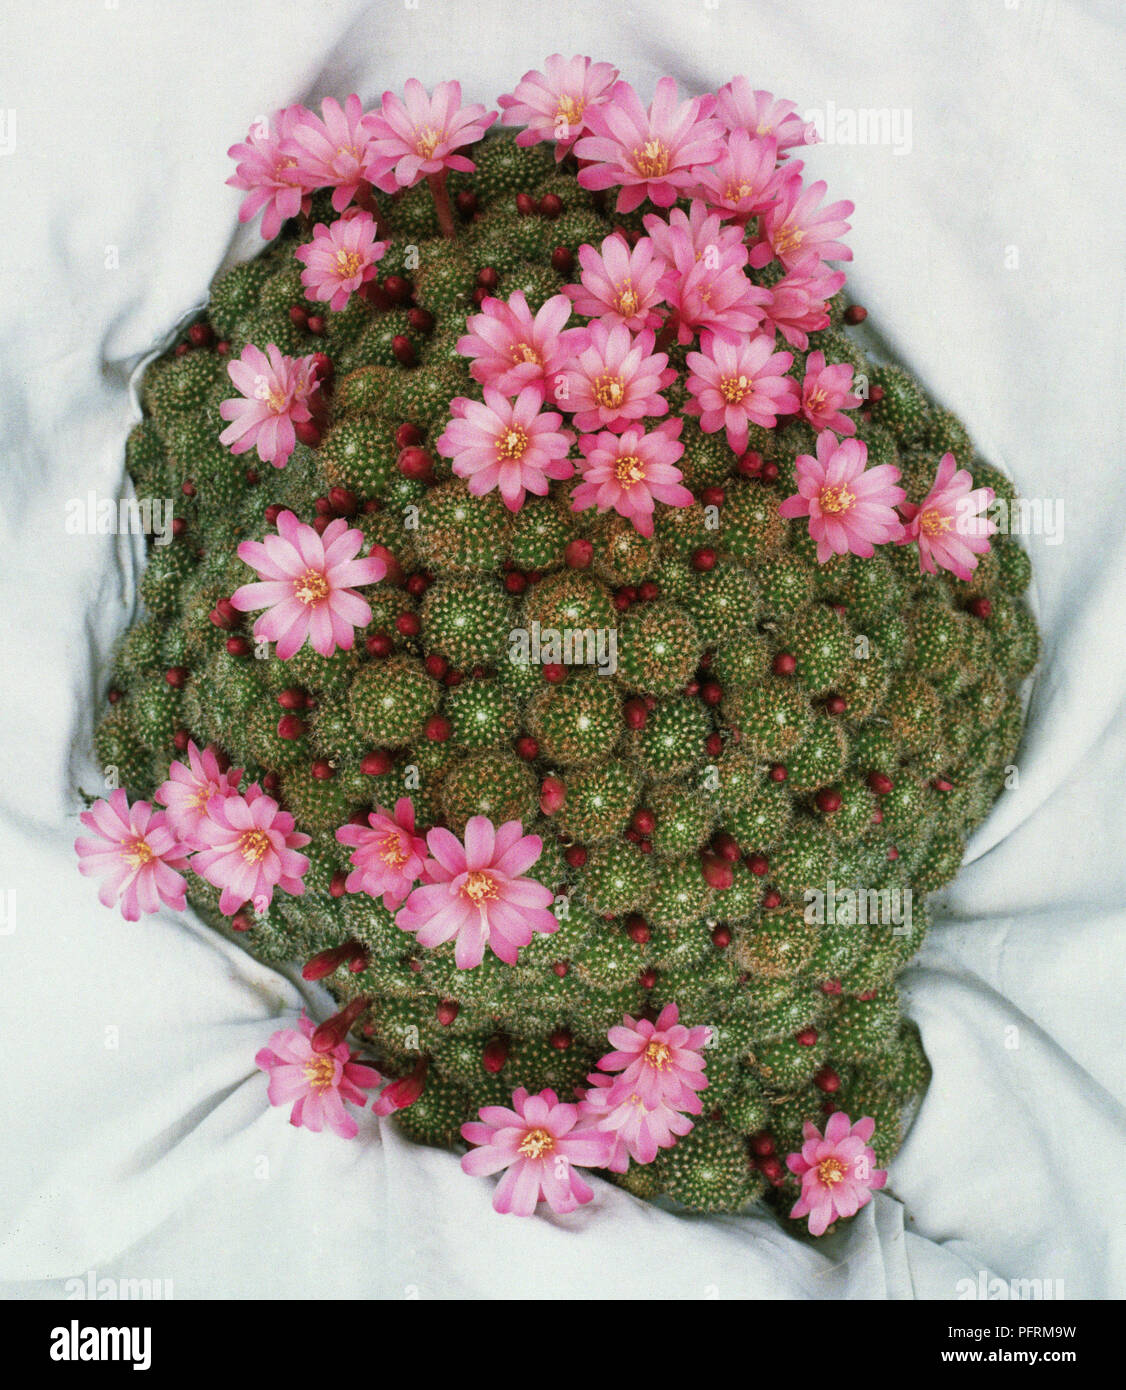 Rebutia heliosa f. perplexa, mound of rounded cactus stems with pink flowers, view from above Stock Photo